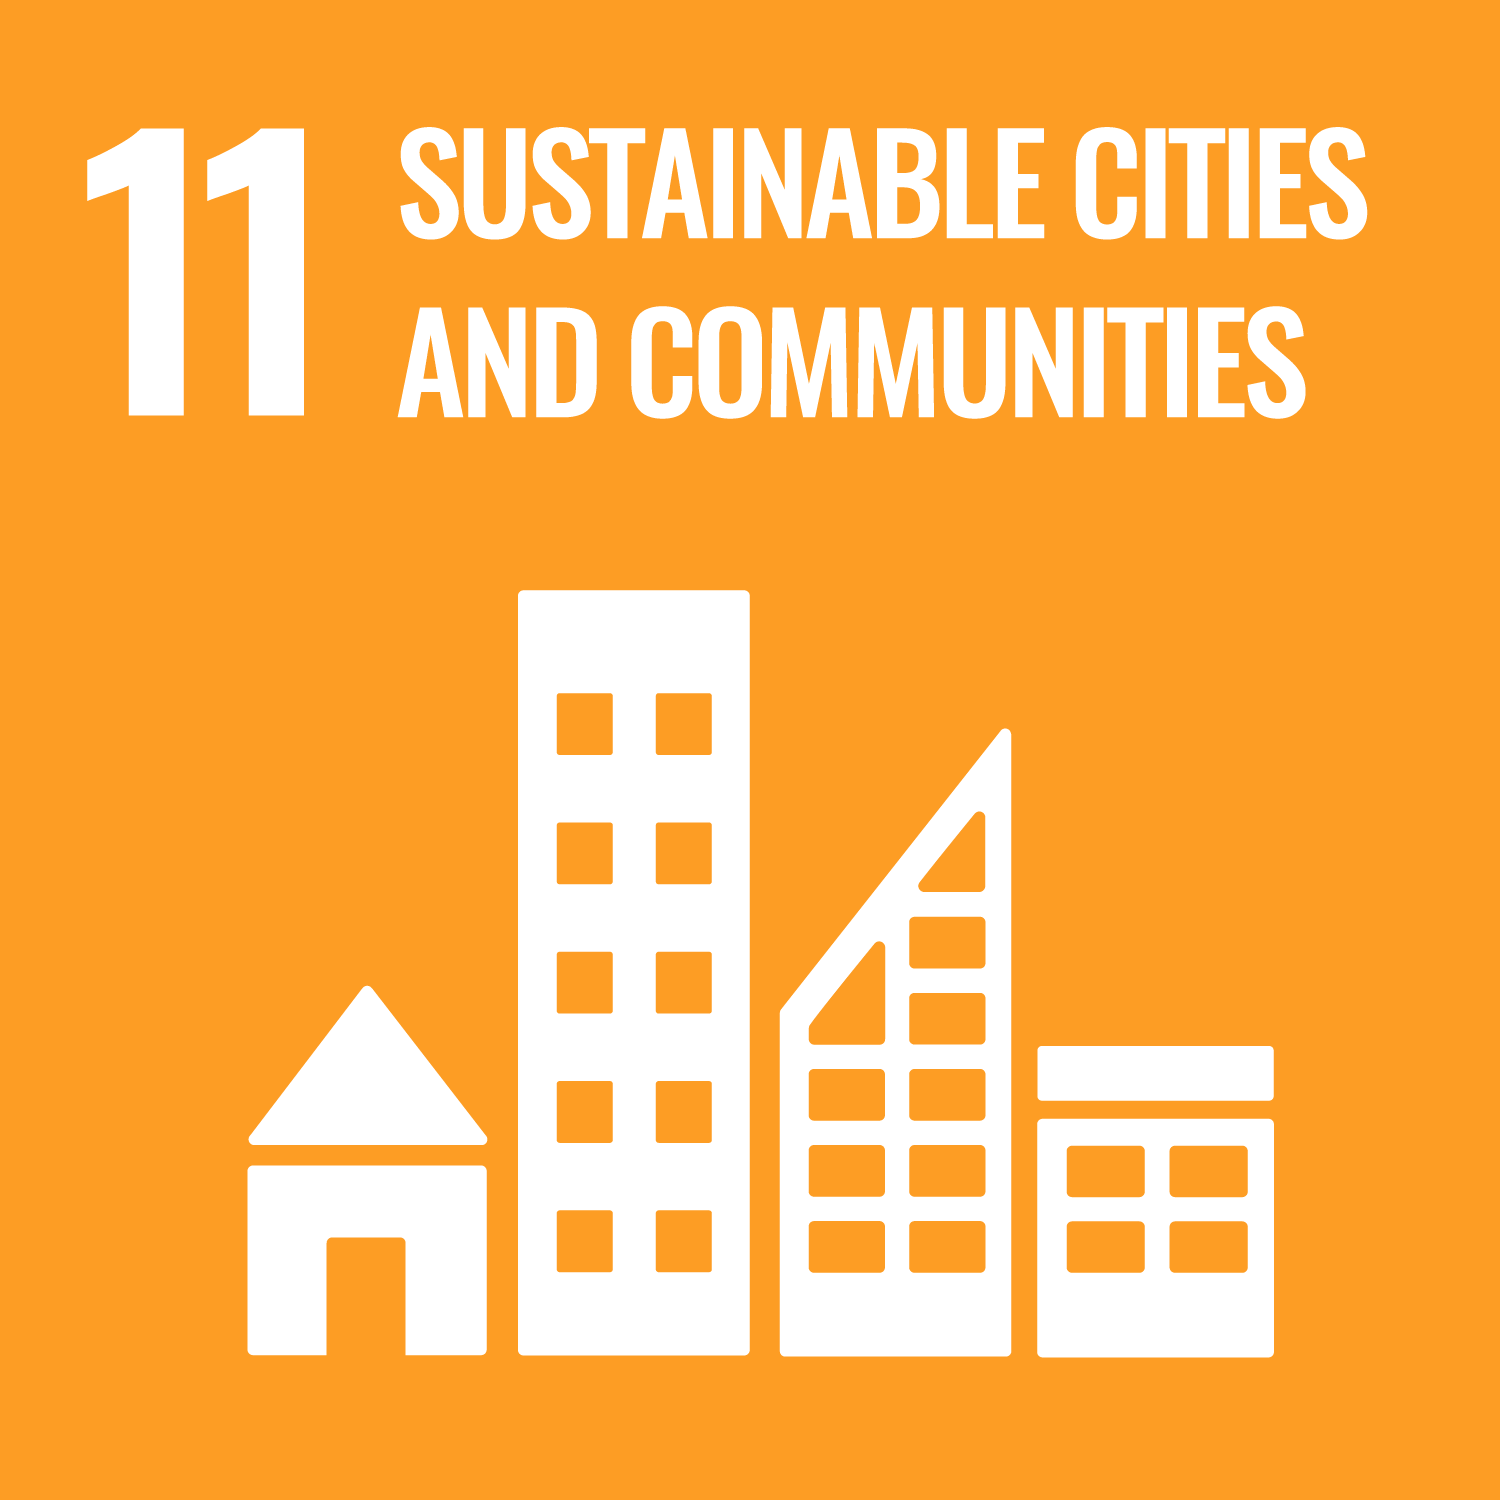 UN Sustainable Development Goal 11: Sustainable Cities and Communities